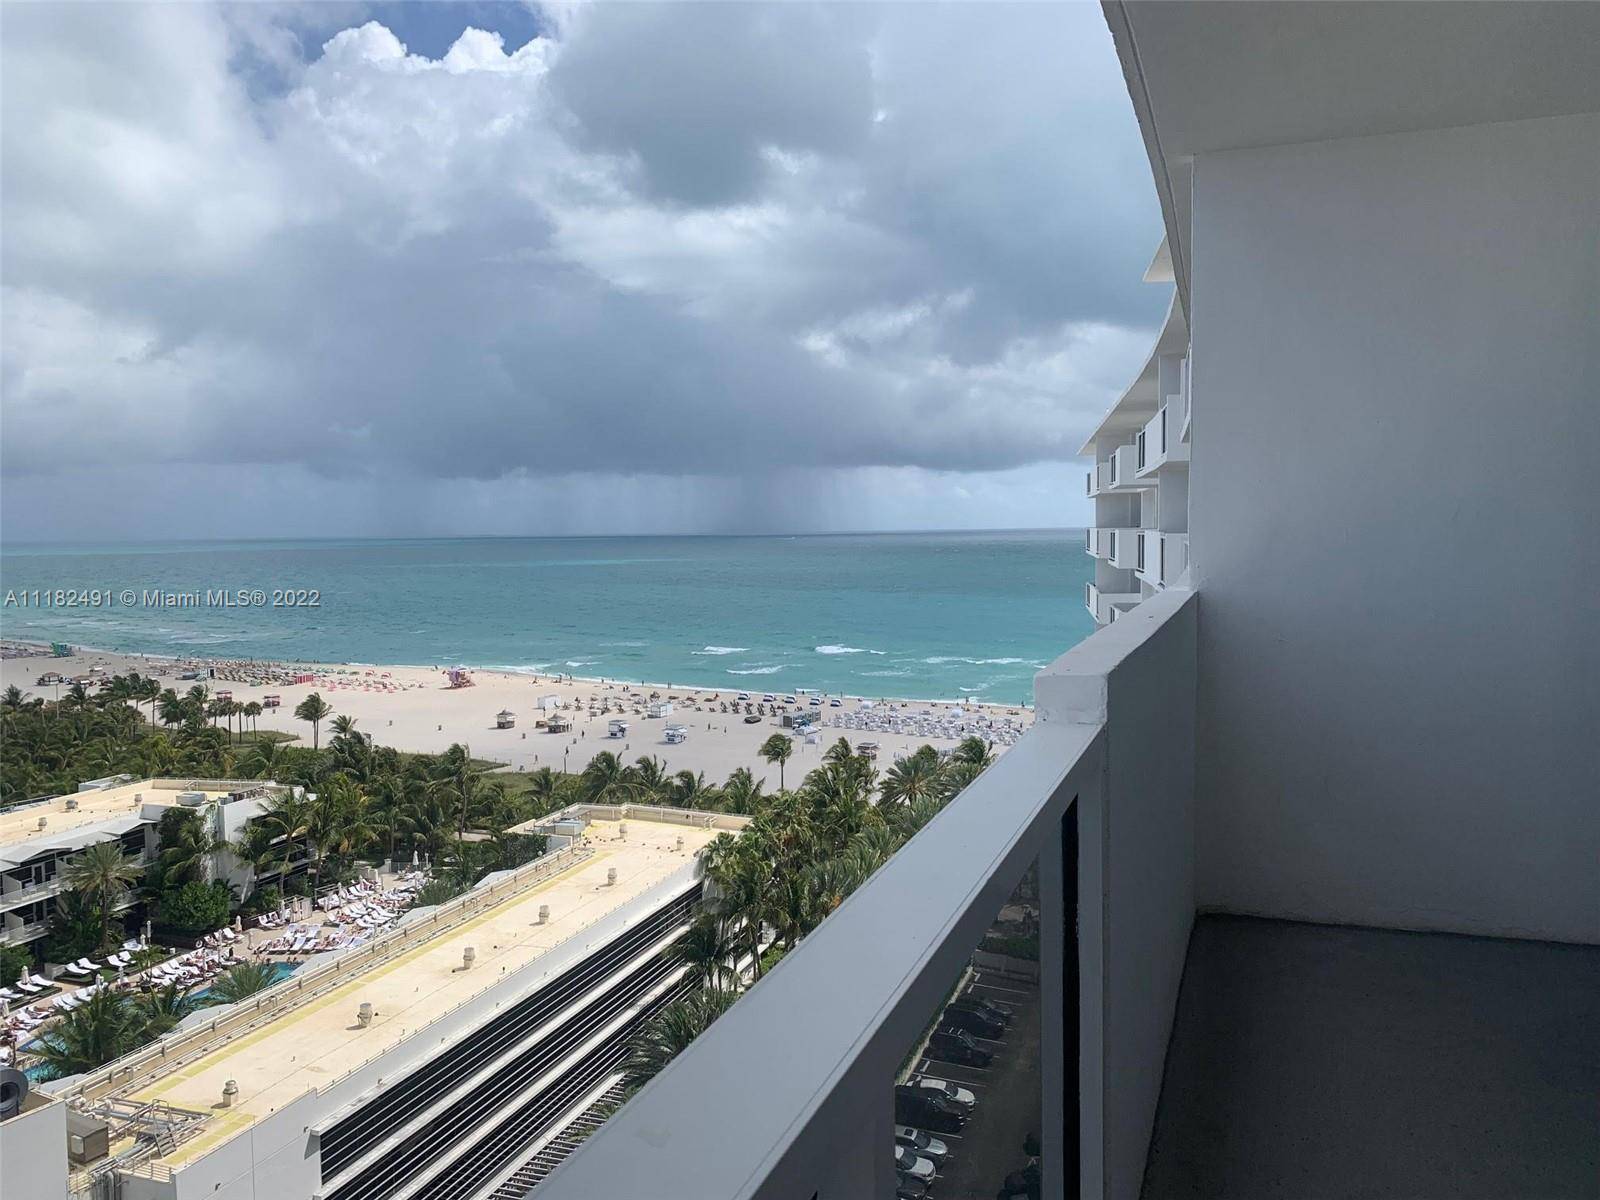 AVAILABLE NOW 1 MONTH UP T 1 YEAR LEASE Renovated unit, Studio Den Balcony and Ocean View, the rent includes WIFI, cable TV, and 1 parking space thru valet.